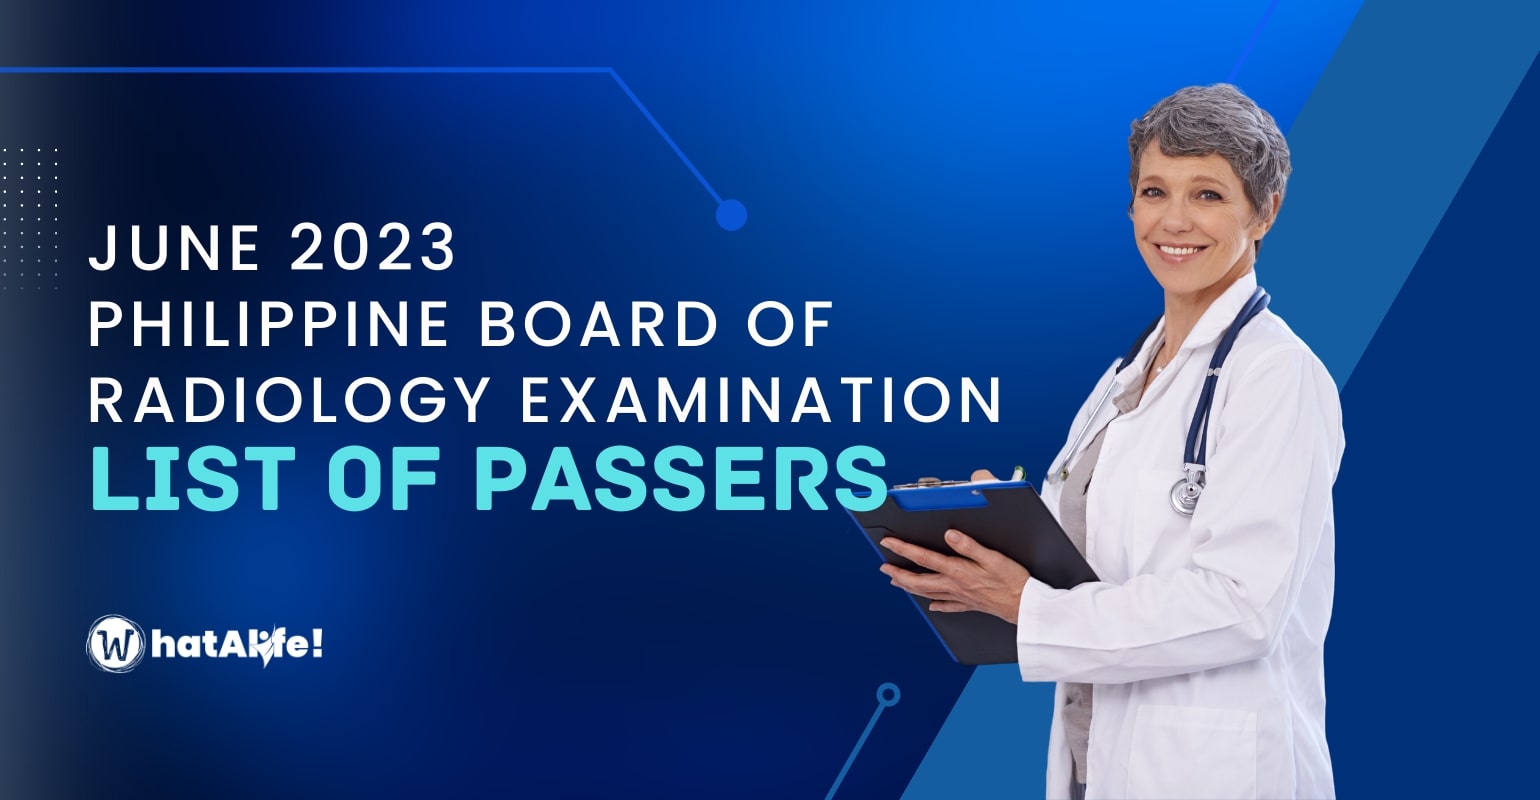 Full List of Passers — June 2023 Philippine Board of Radiology Exam Results